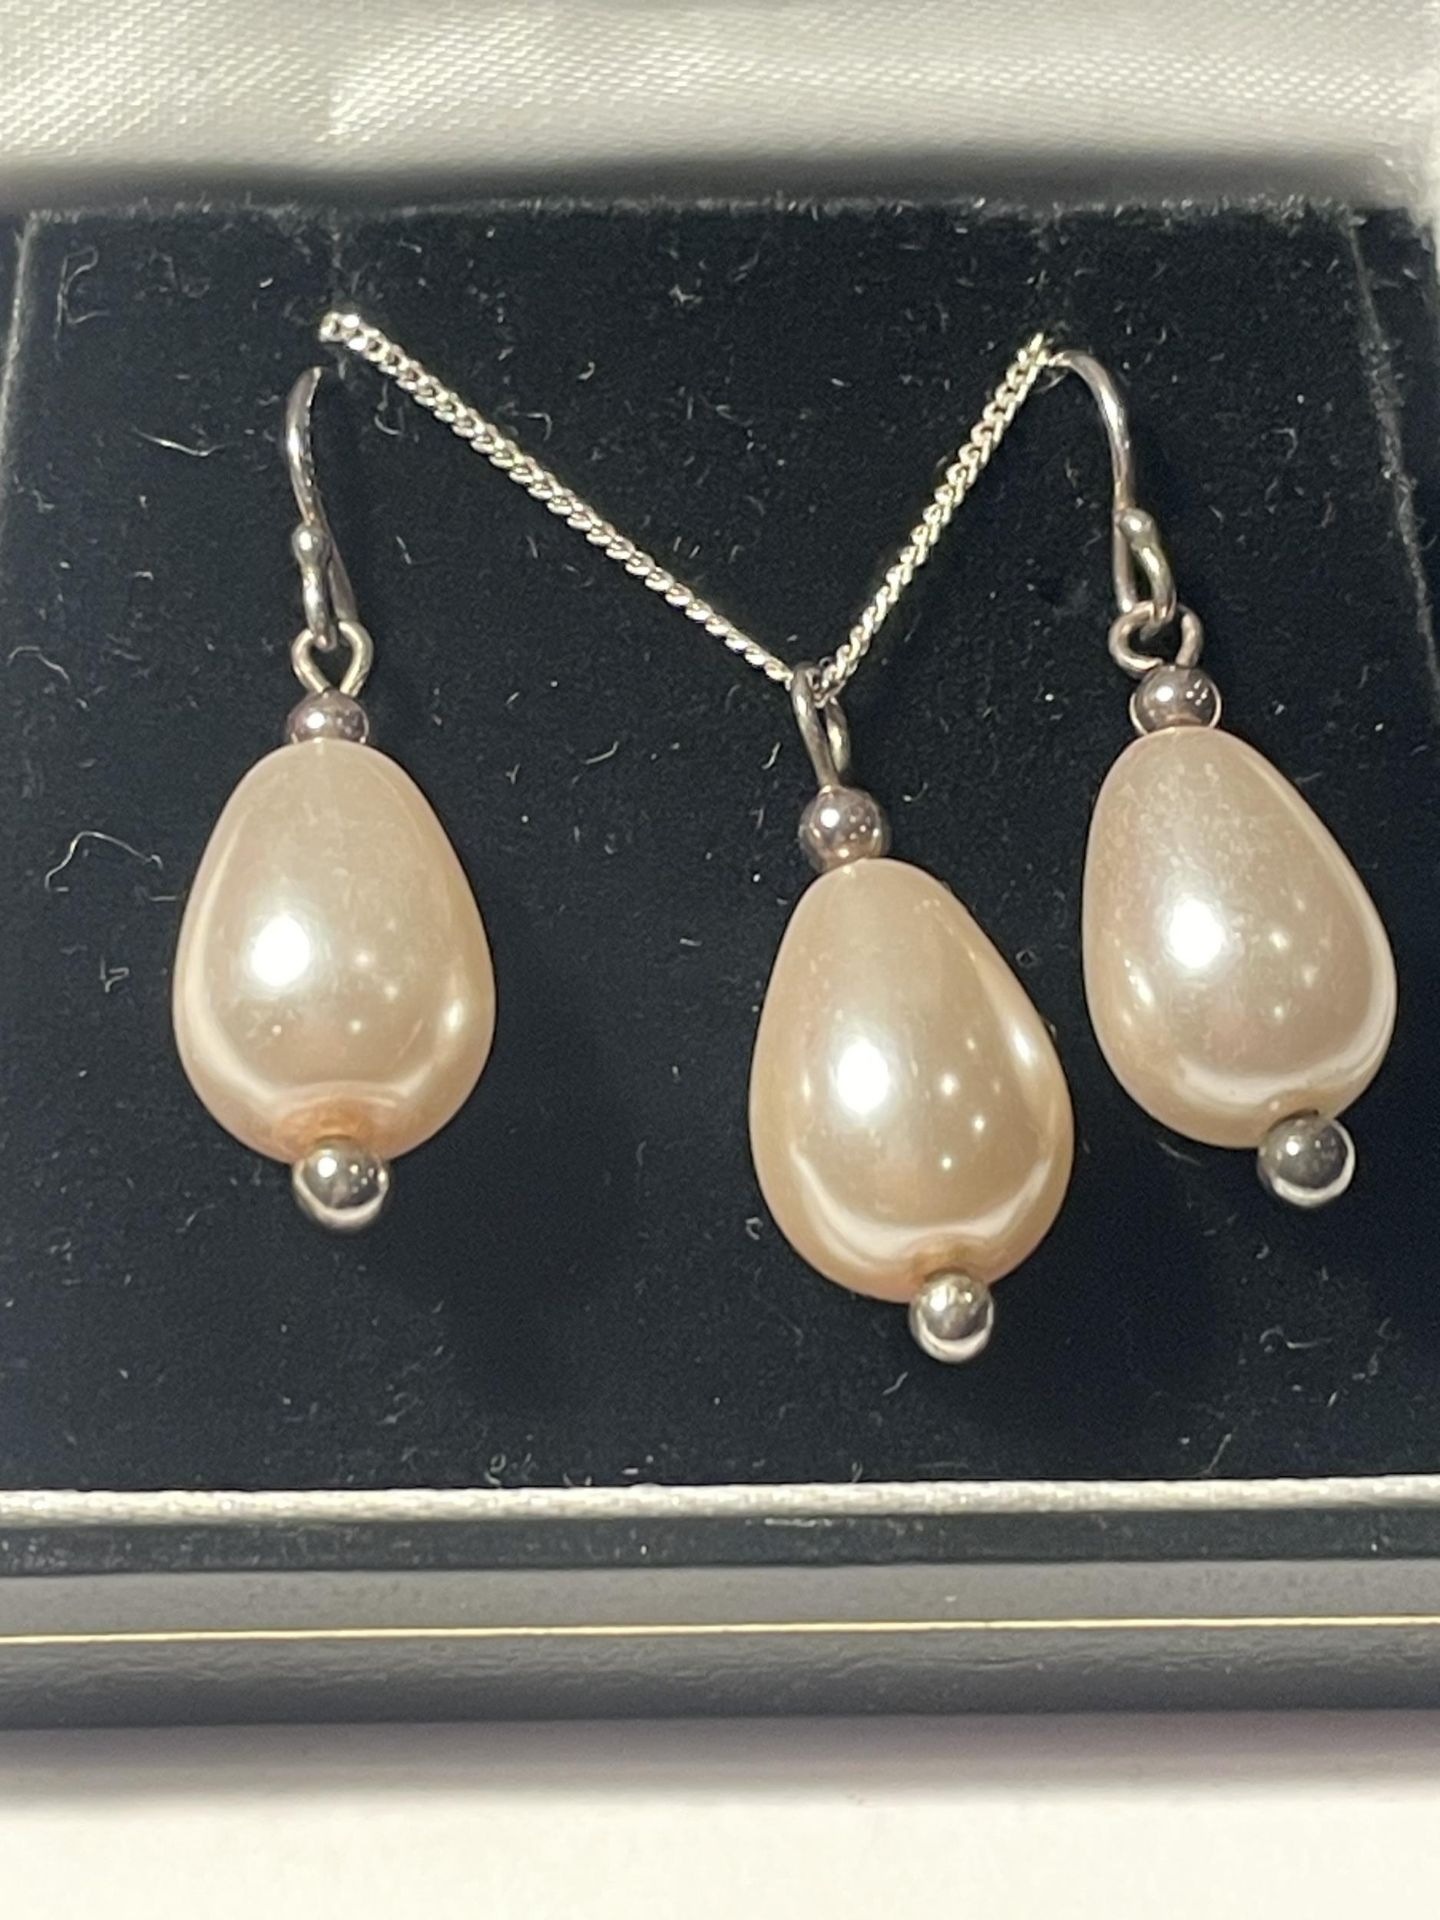 A SILVER WITH PEARL NECKLACE AND EARRING SET IN A PRESENTATION BOX - Image 2 of 2